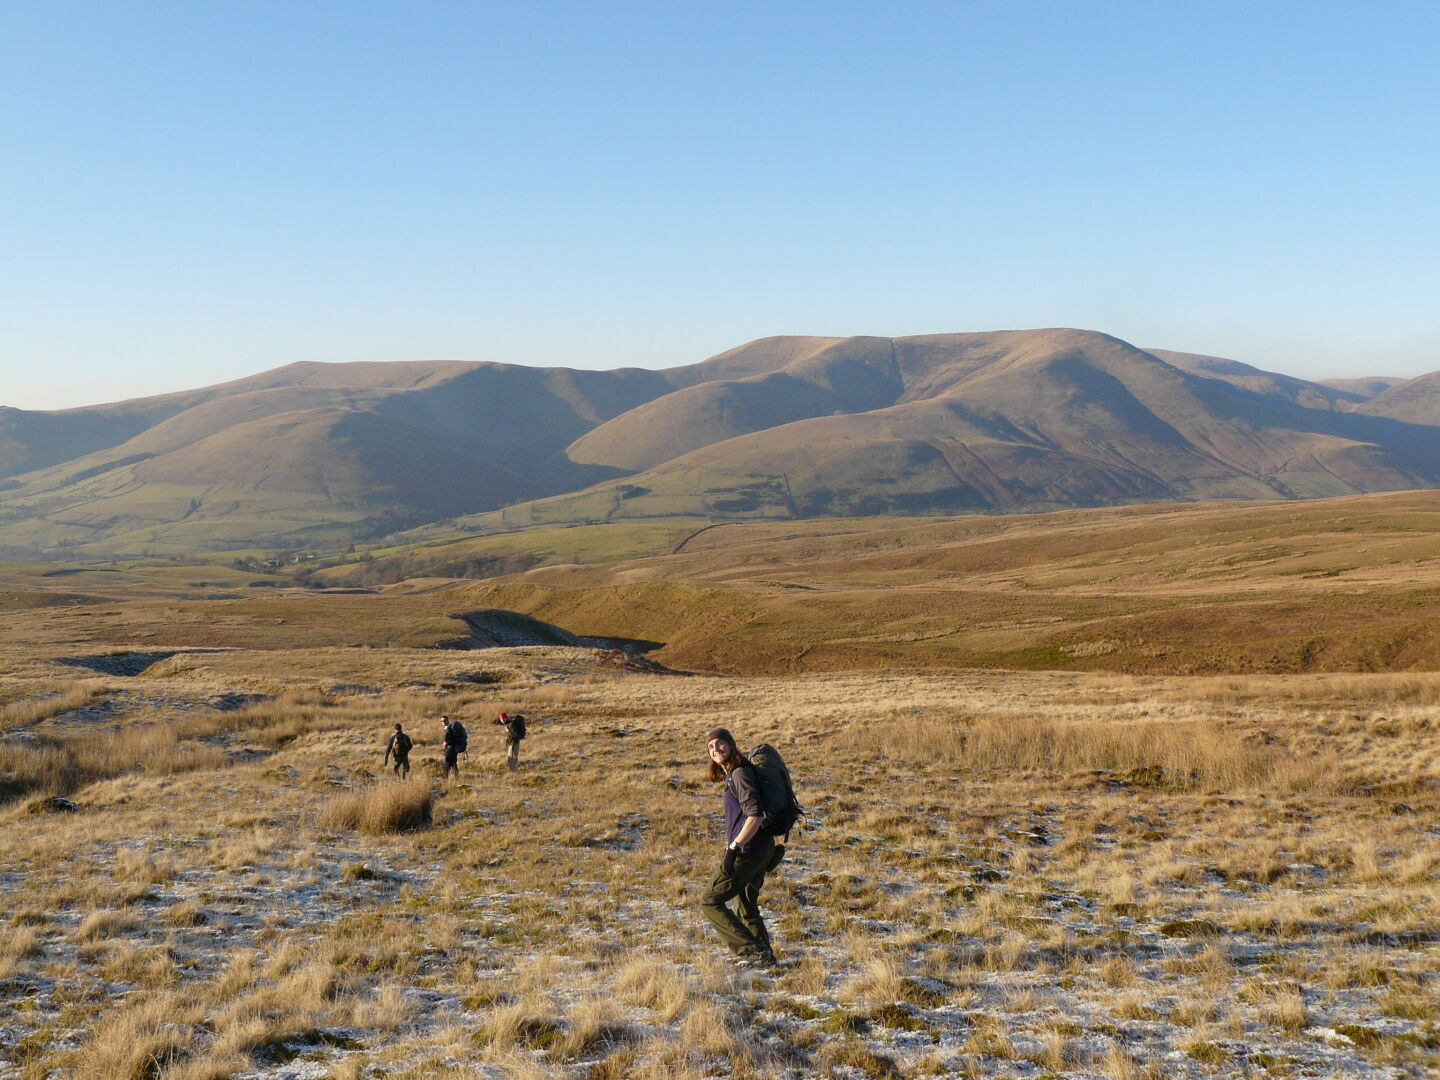 On our way down towards Sedbergh.